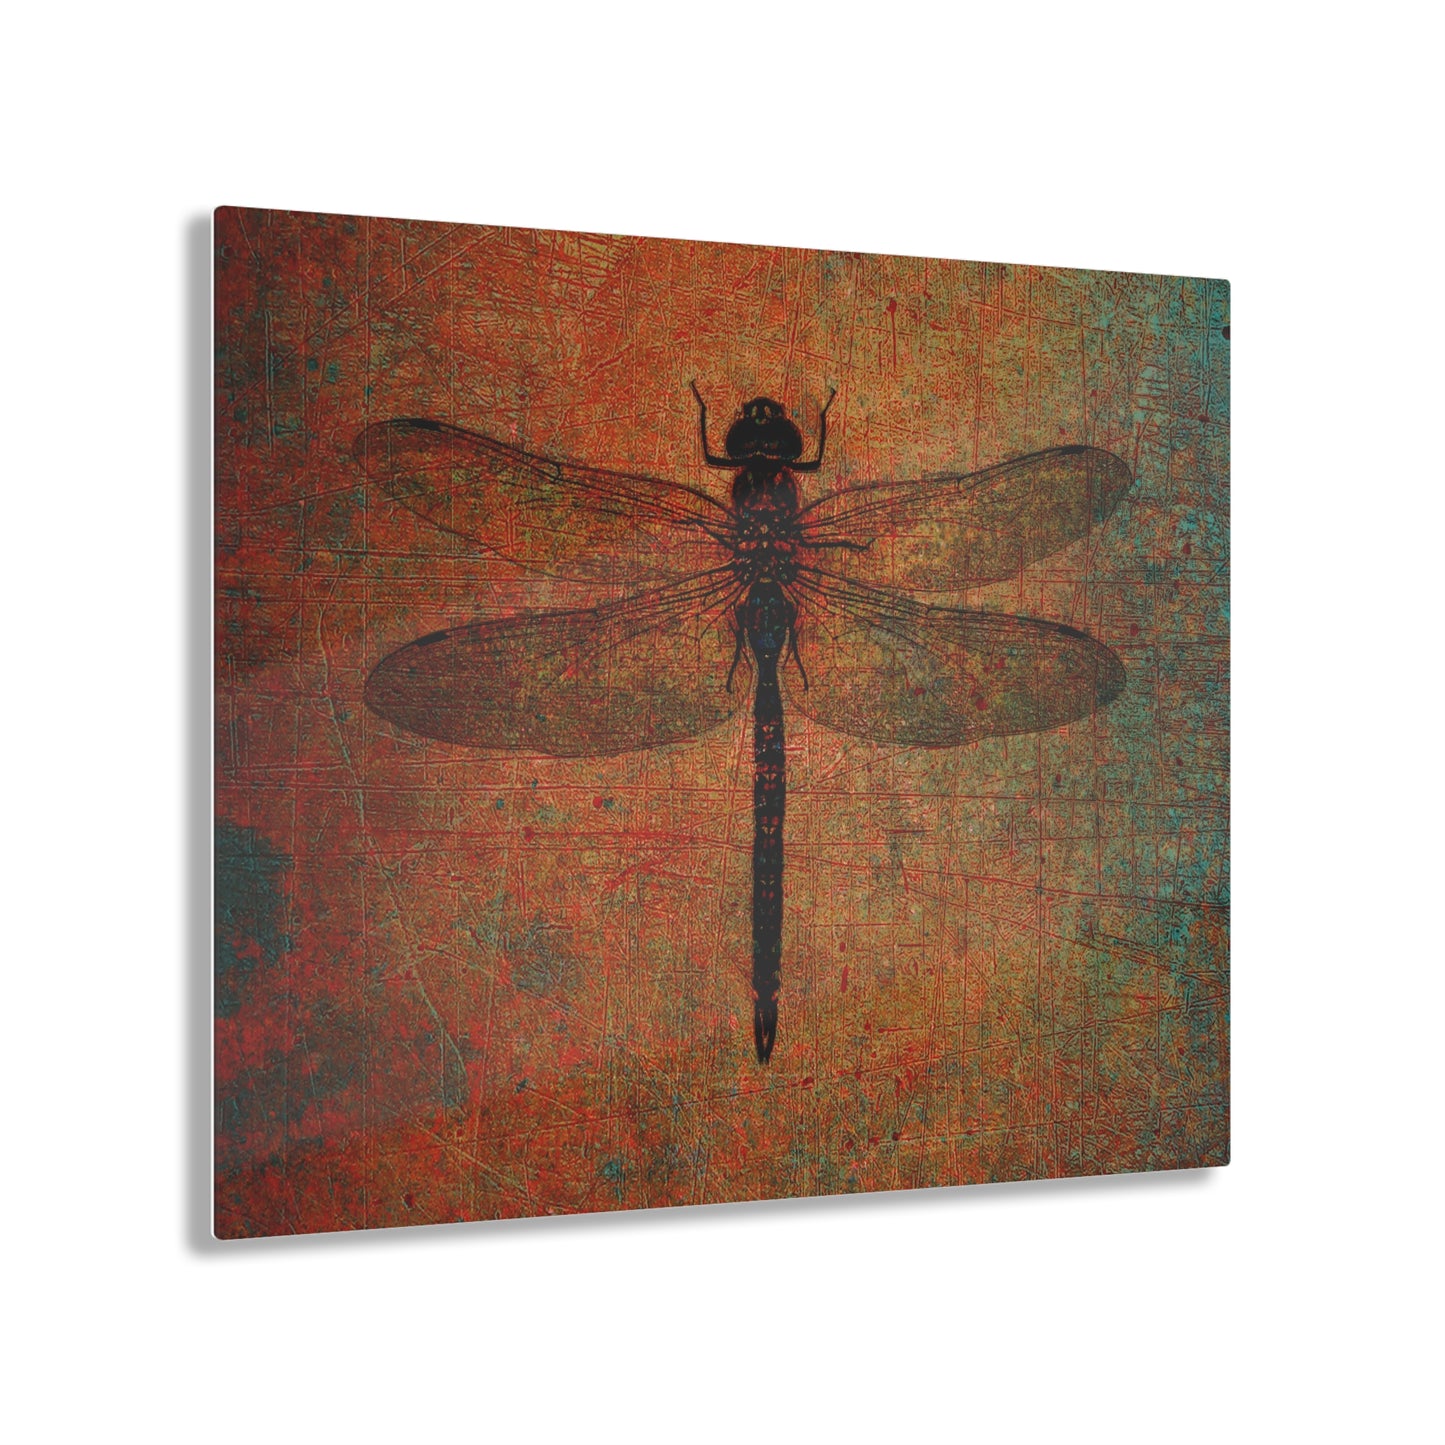 Dragonfly Themed Modern Wall Art - Dragonfly on Distressed Brown Stone Background on a Crystal Clear Acrylic Panel